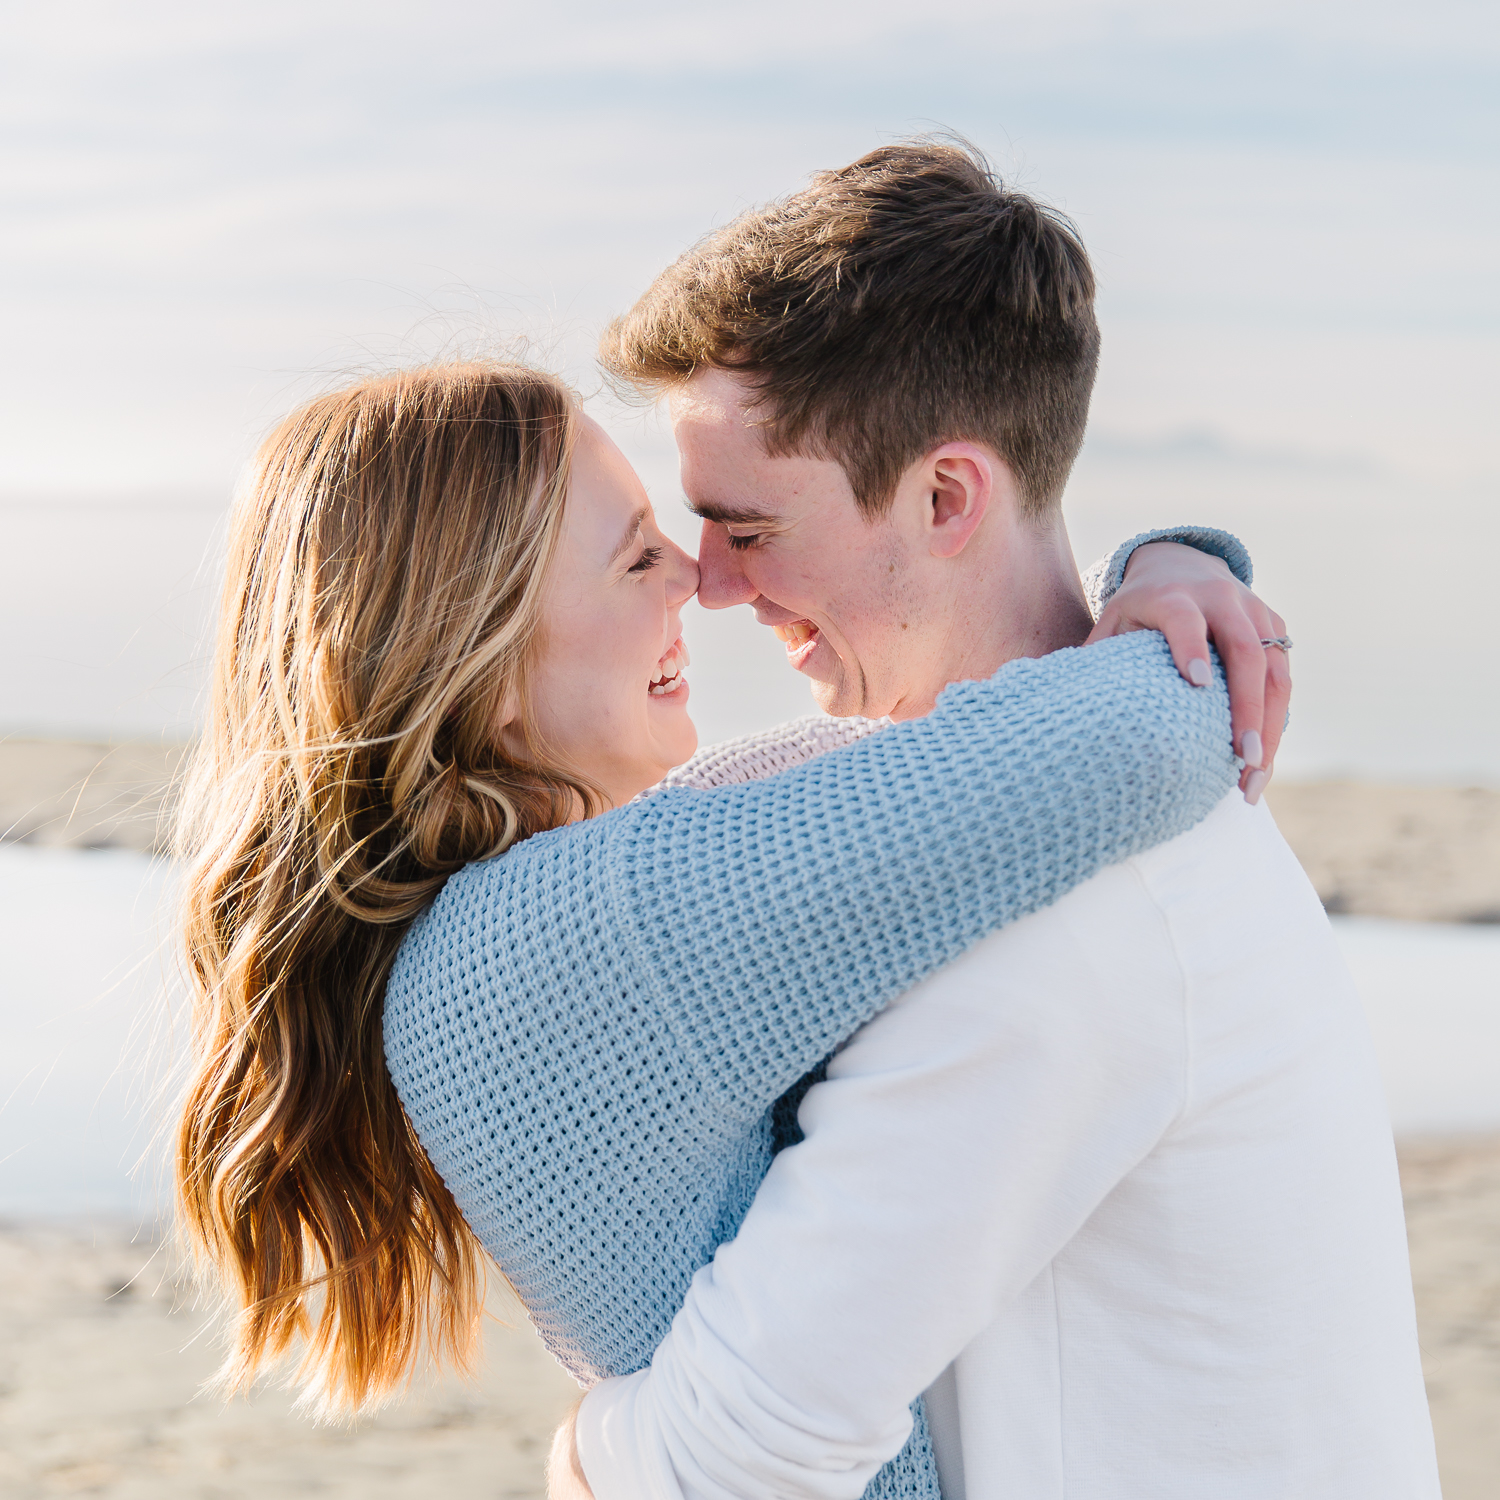 Saltair Engagements | Utah Engagement photographer l Engagement inspiration l What to Wear | Best engagement pose ideas l Engagement Photos Utah l Candid engagements | Leianne Phillips Photography